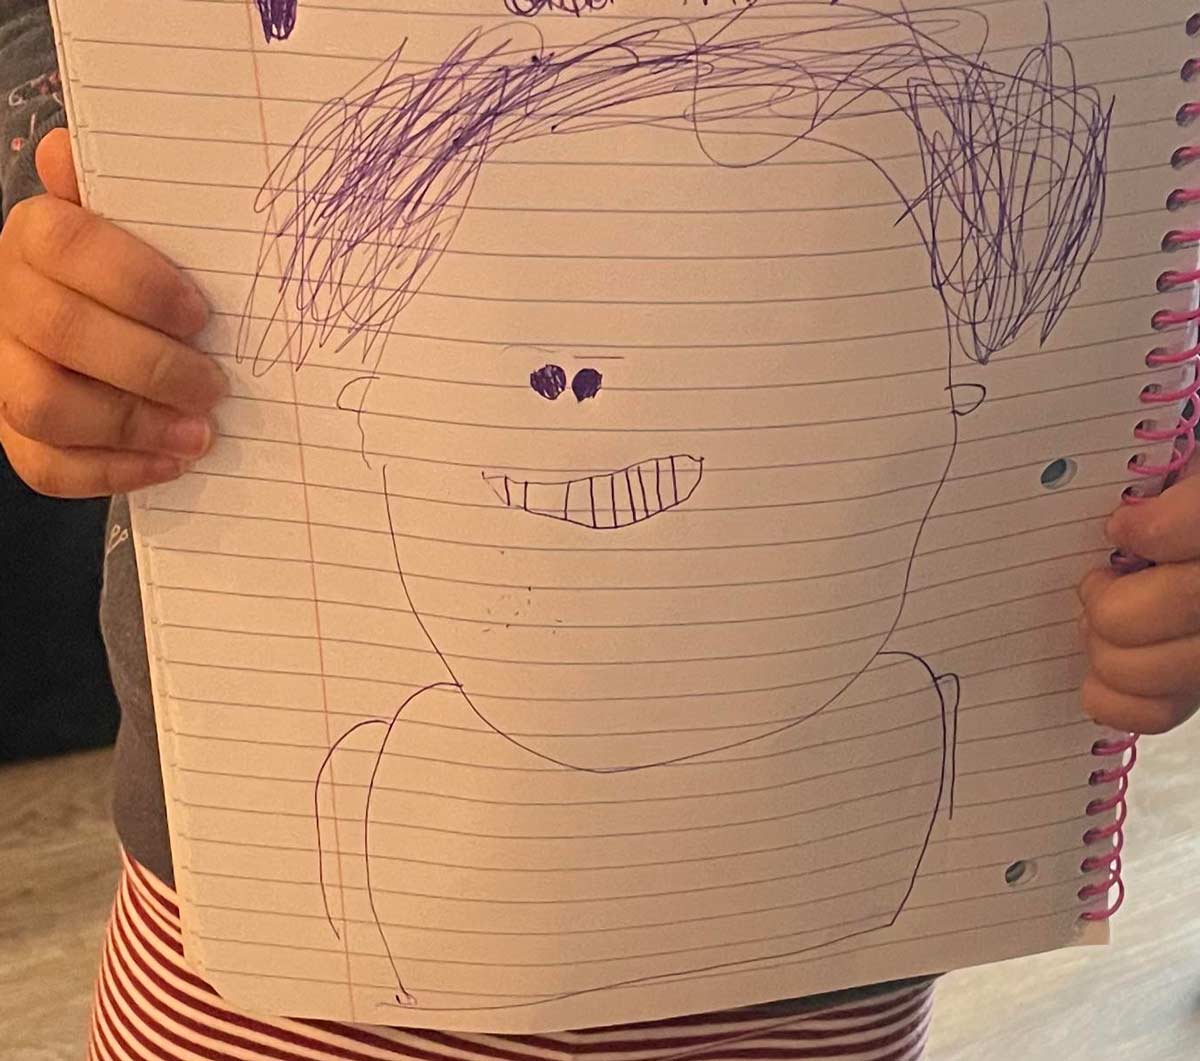 My 3 year old drew me, and her mom won't stop laughing at me